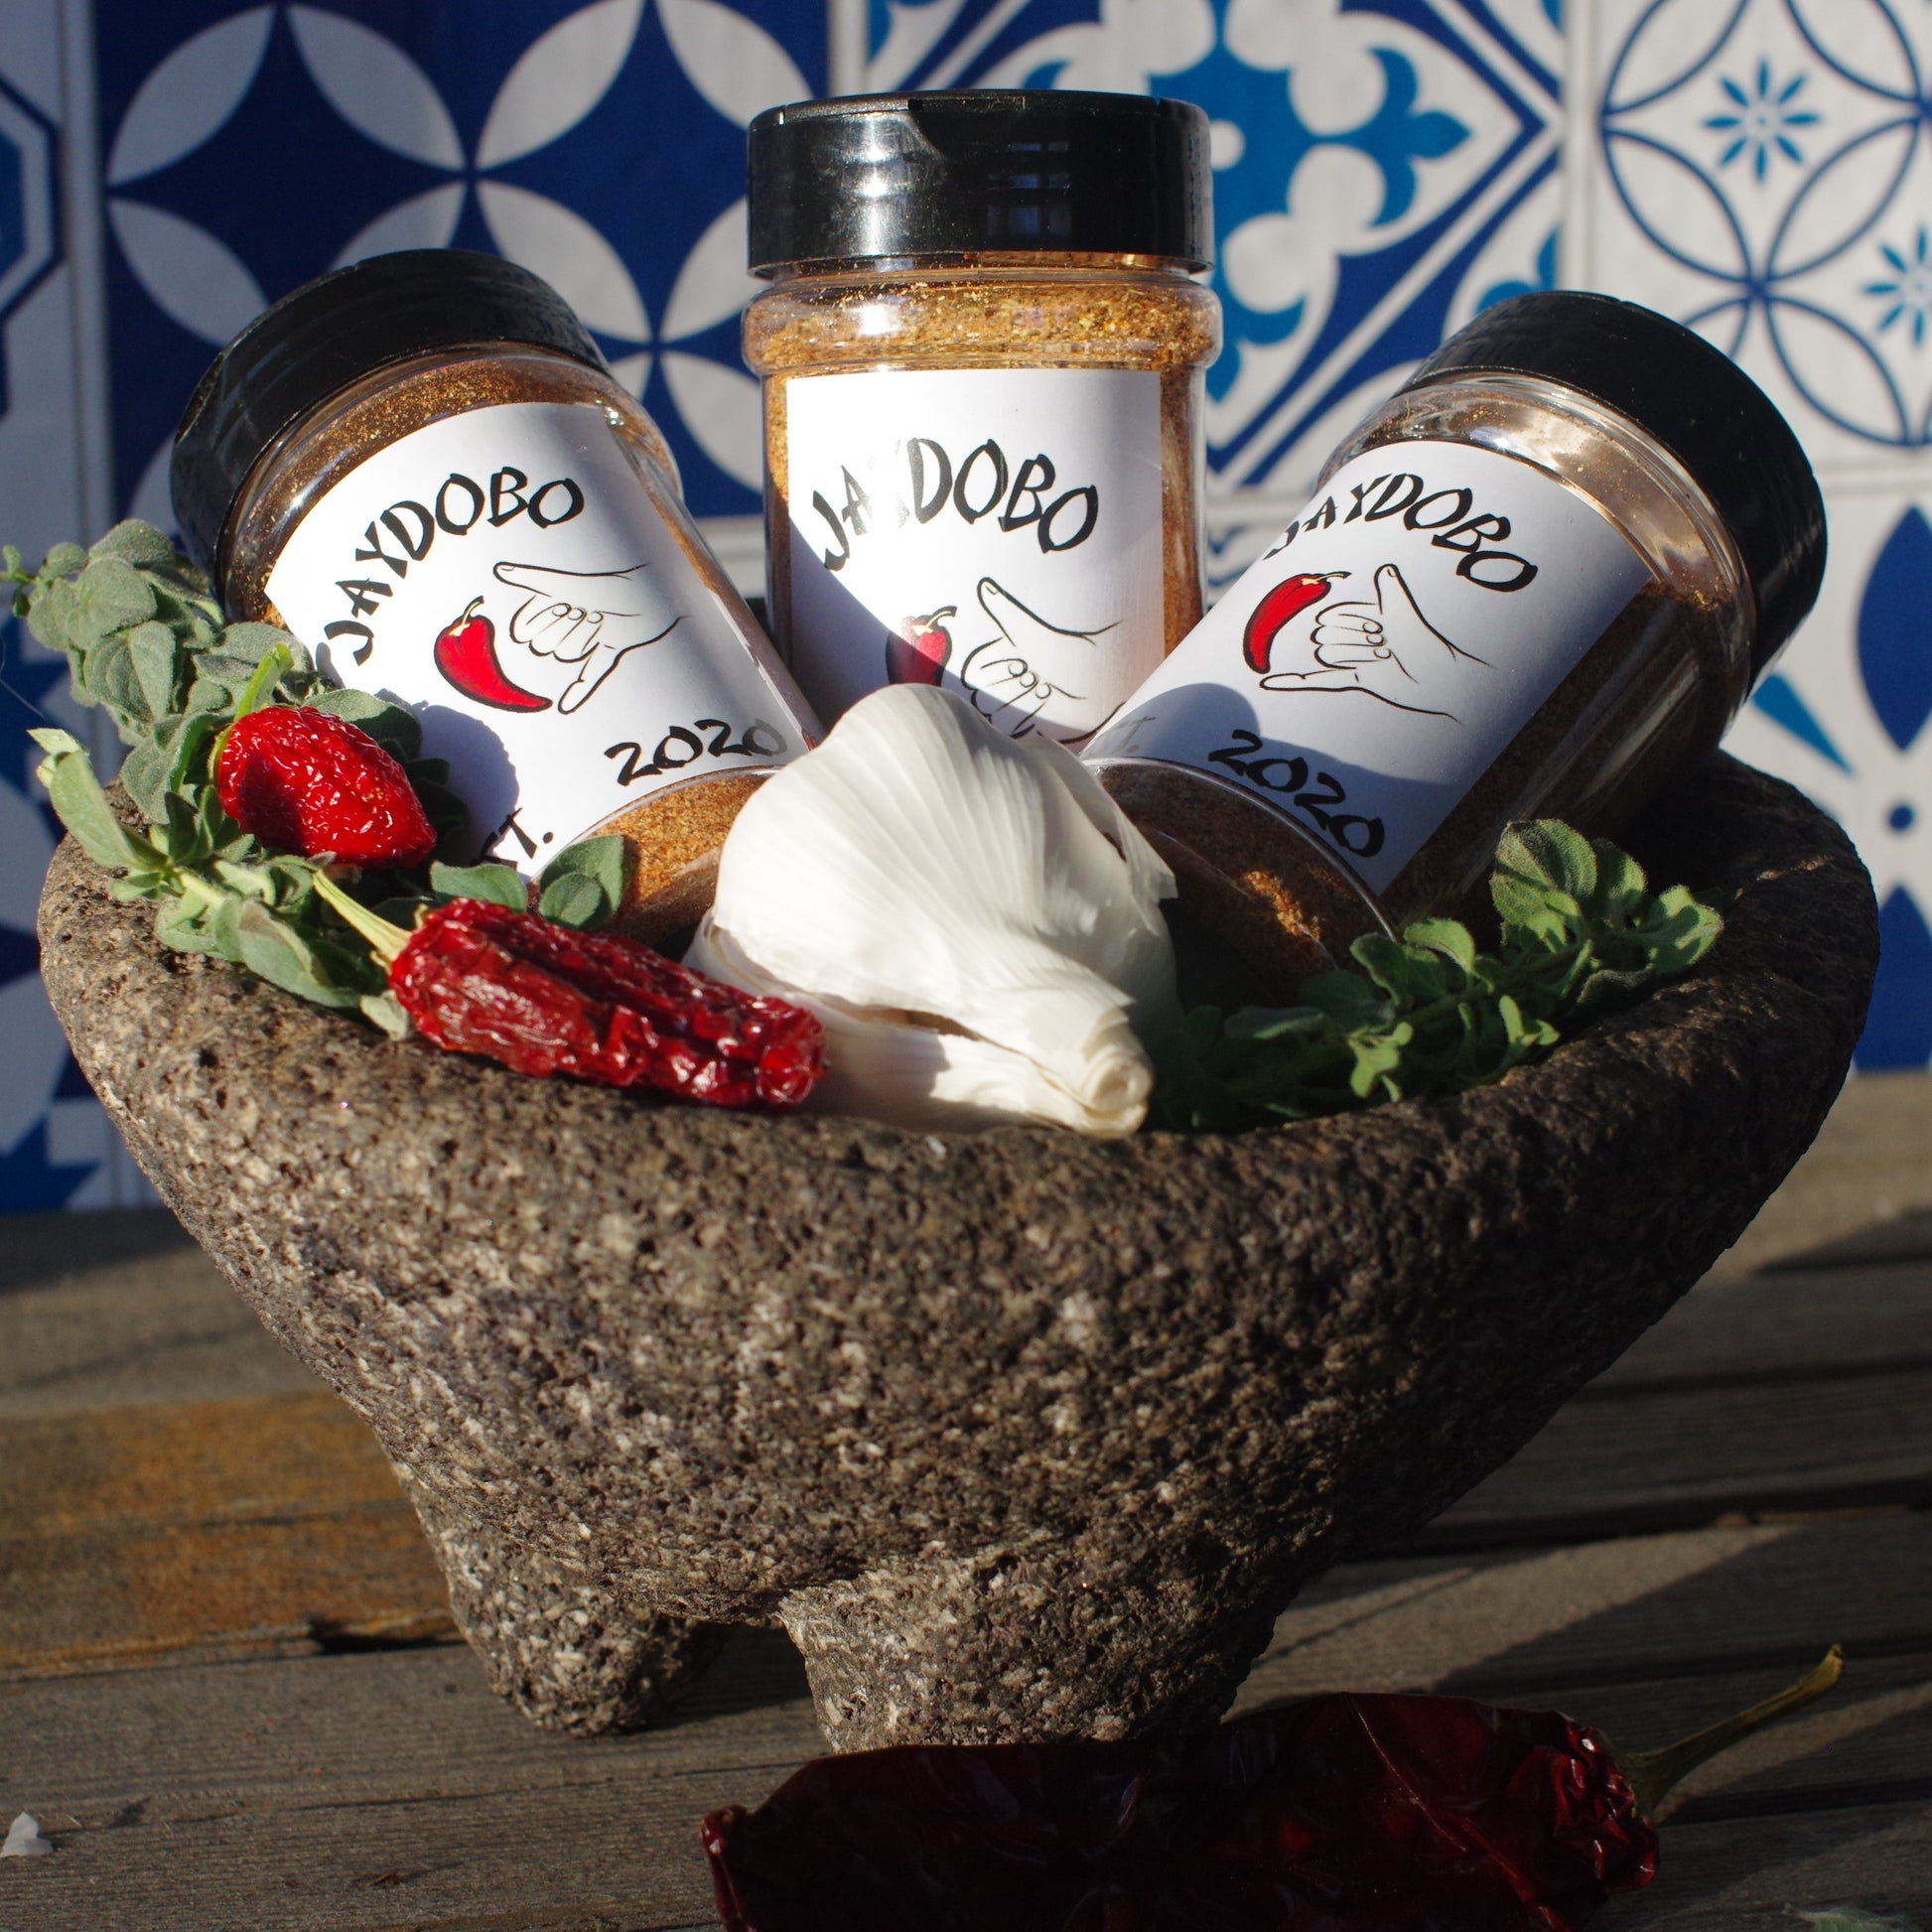 Three Jaydobo spice blend bottles set in a molcajete with oregano, carolina reaper peppers, and garlic bulbs.